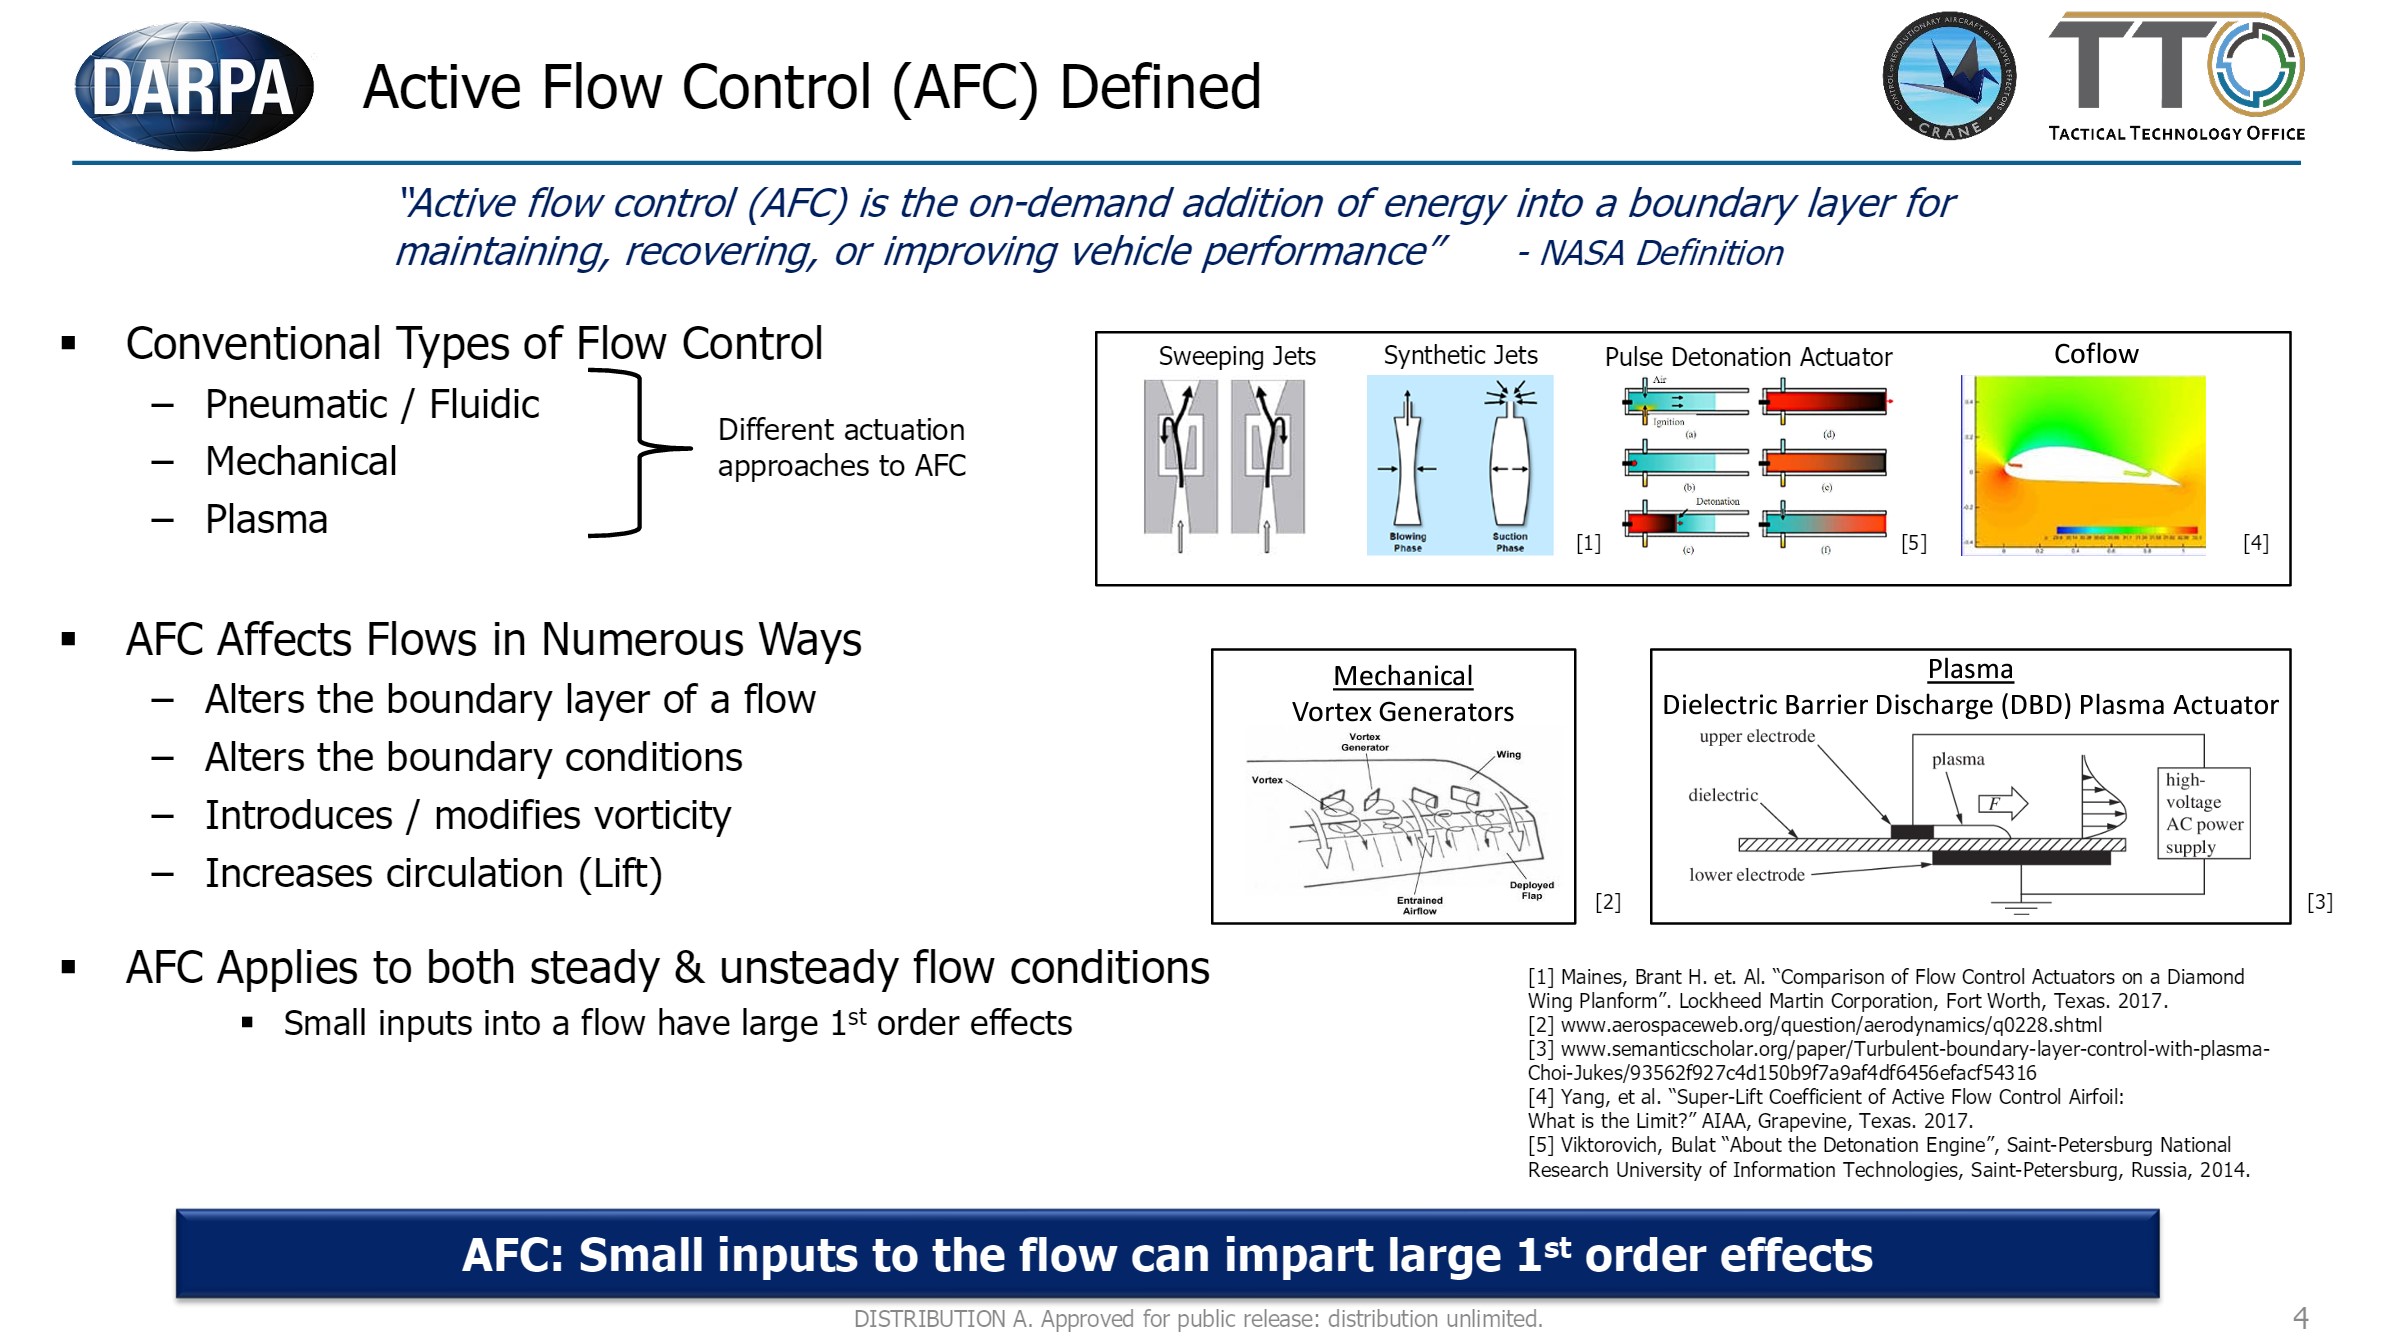 A slide from a 2021 DARPA presentation on CRANE outlining various methods for Active Flow Control (AFC).